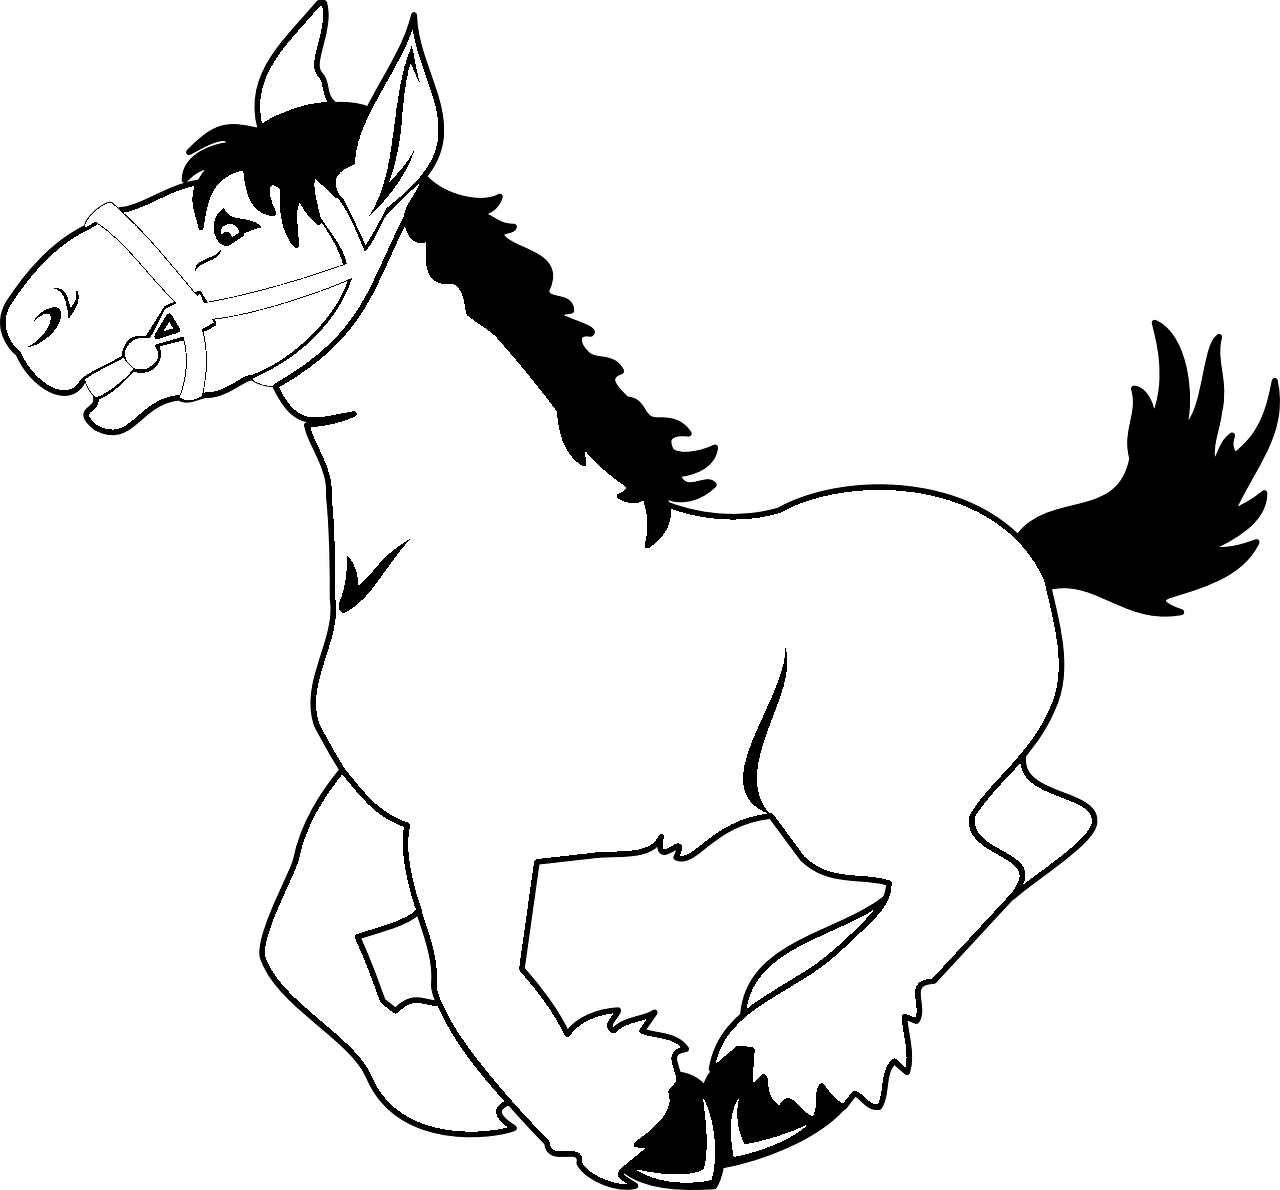 Coloring page of galloping horse cartoon style